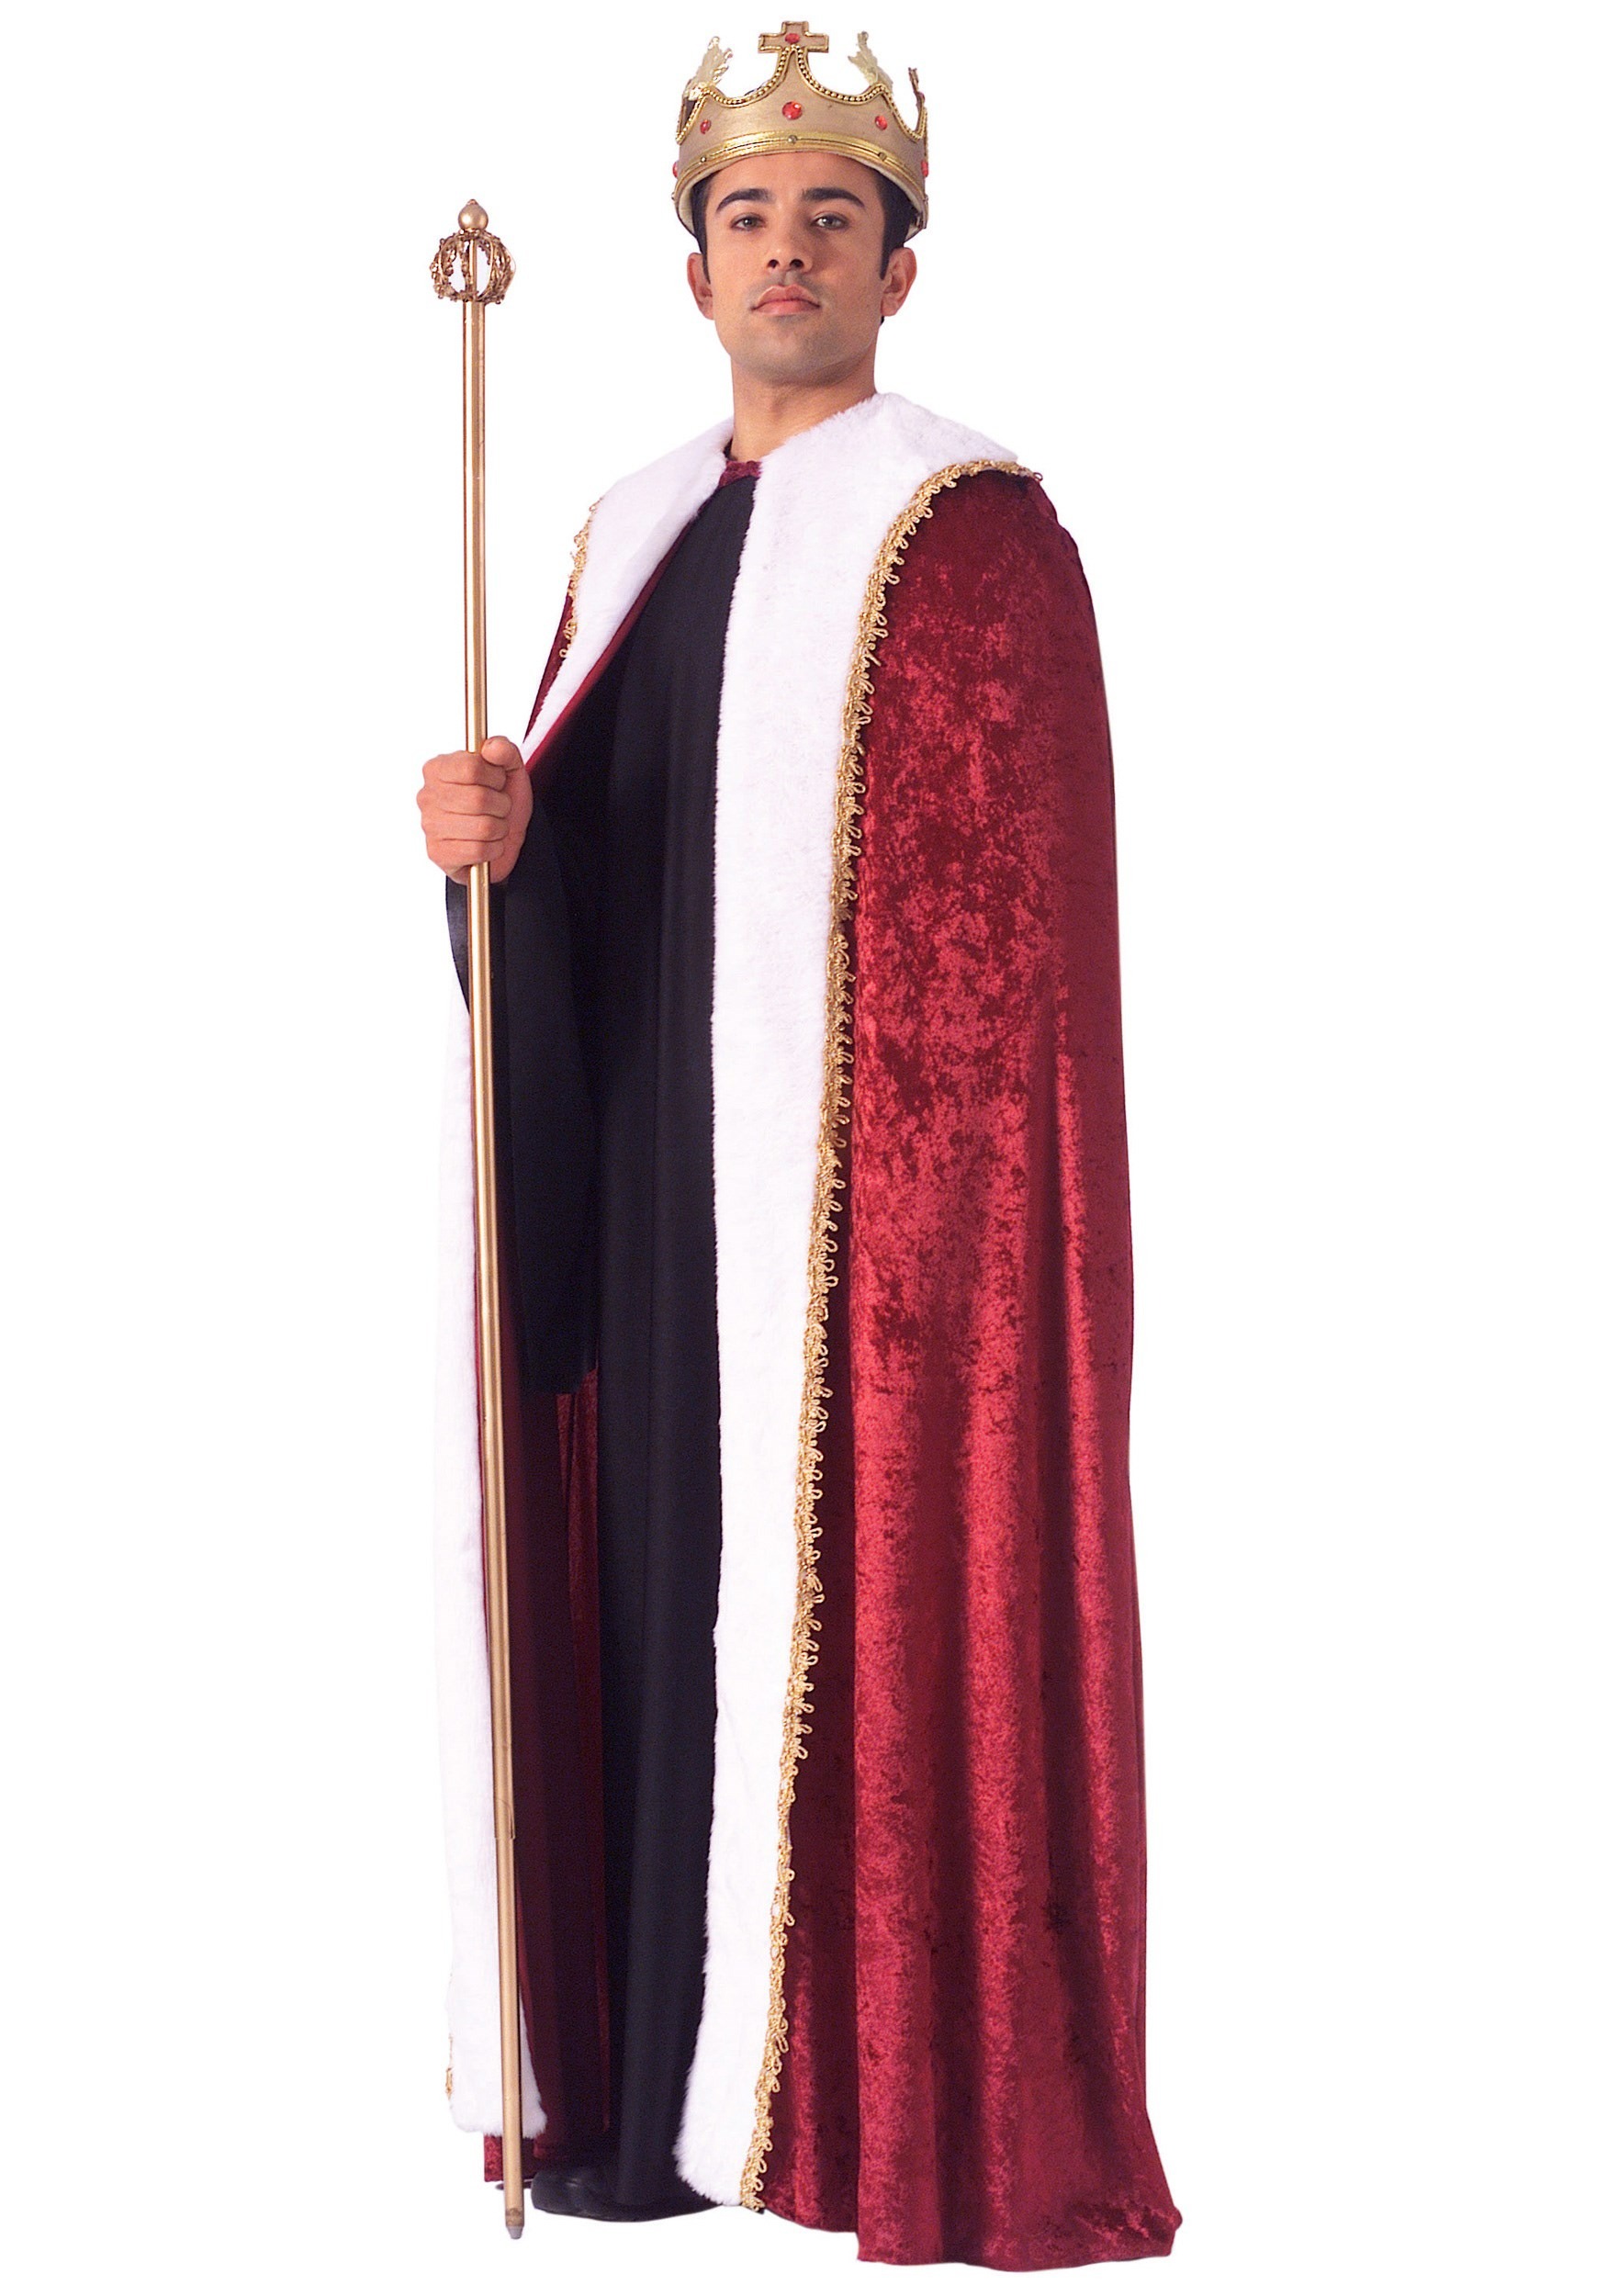 King of Hearts Robe Costume for Adults